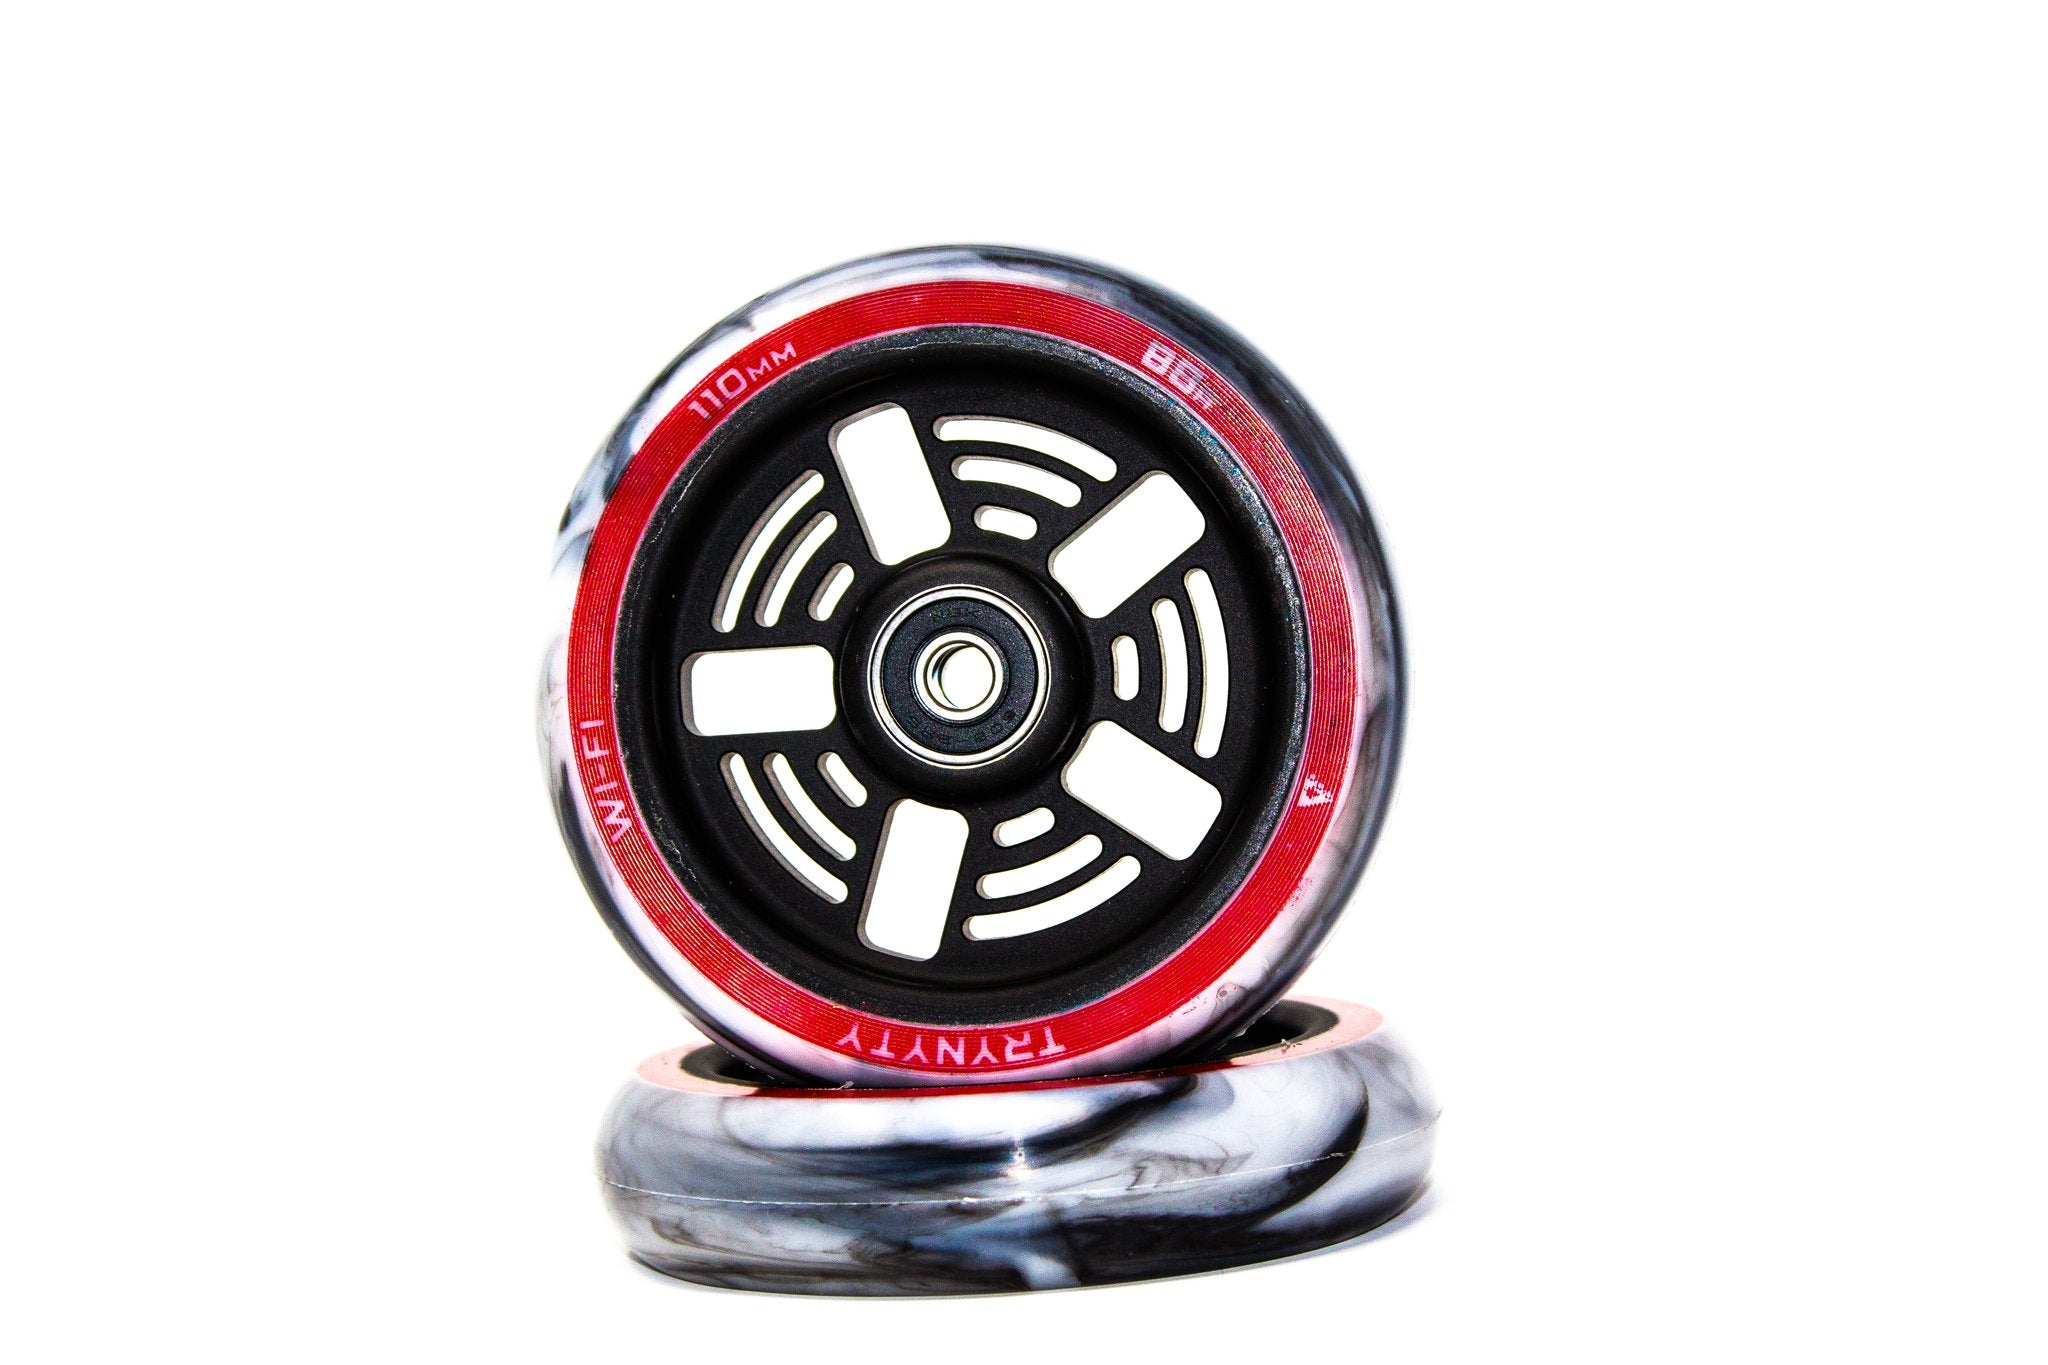 TRYNYTY SCOOTER Wi-Fi WHEELS 110mm $65 PAIR!